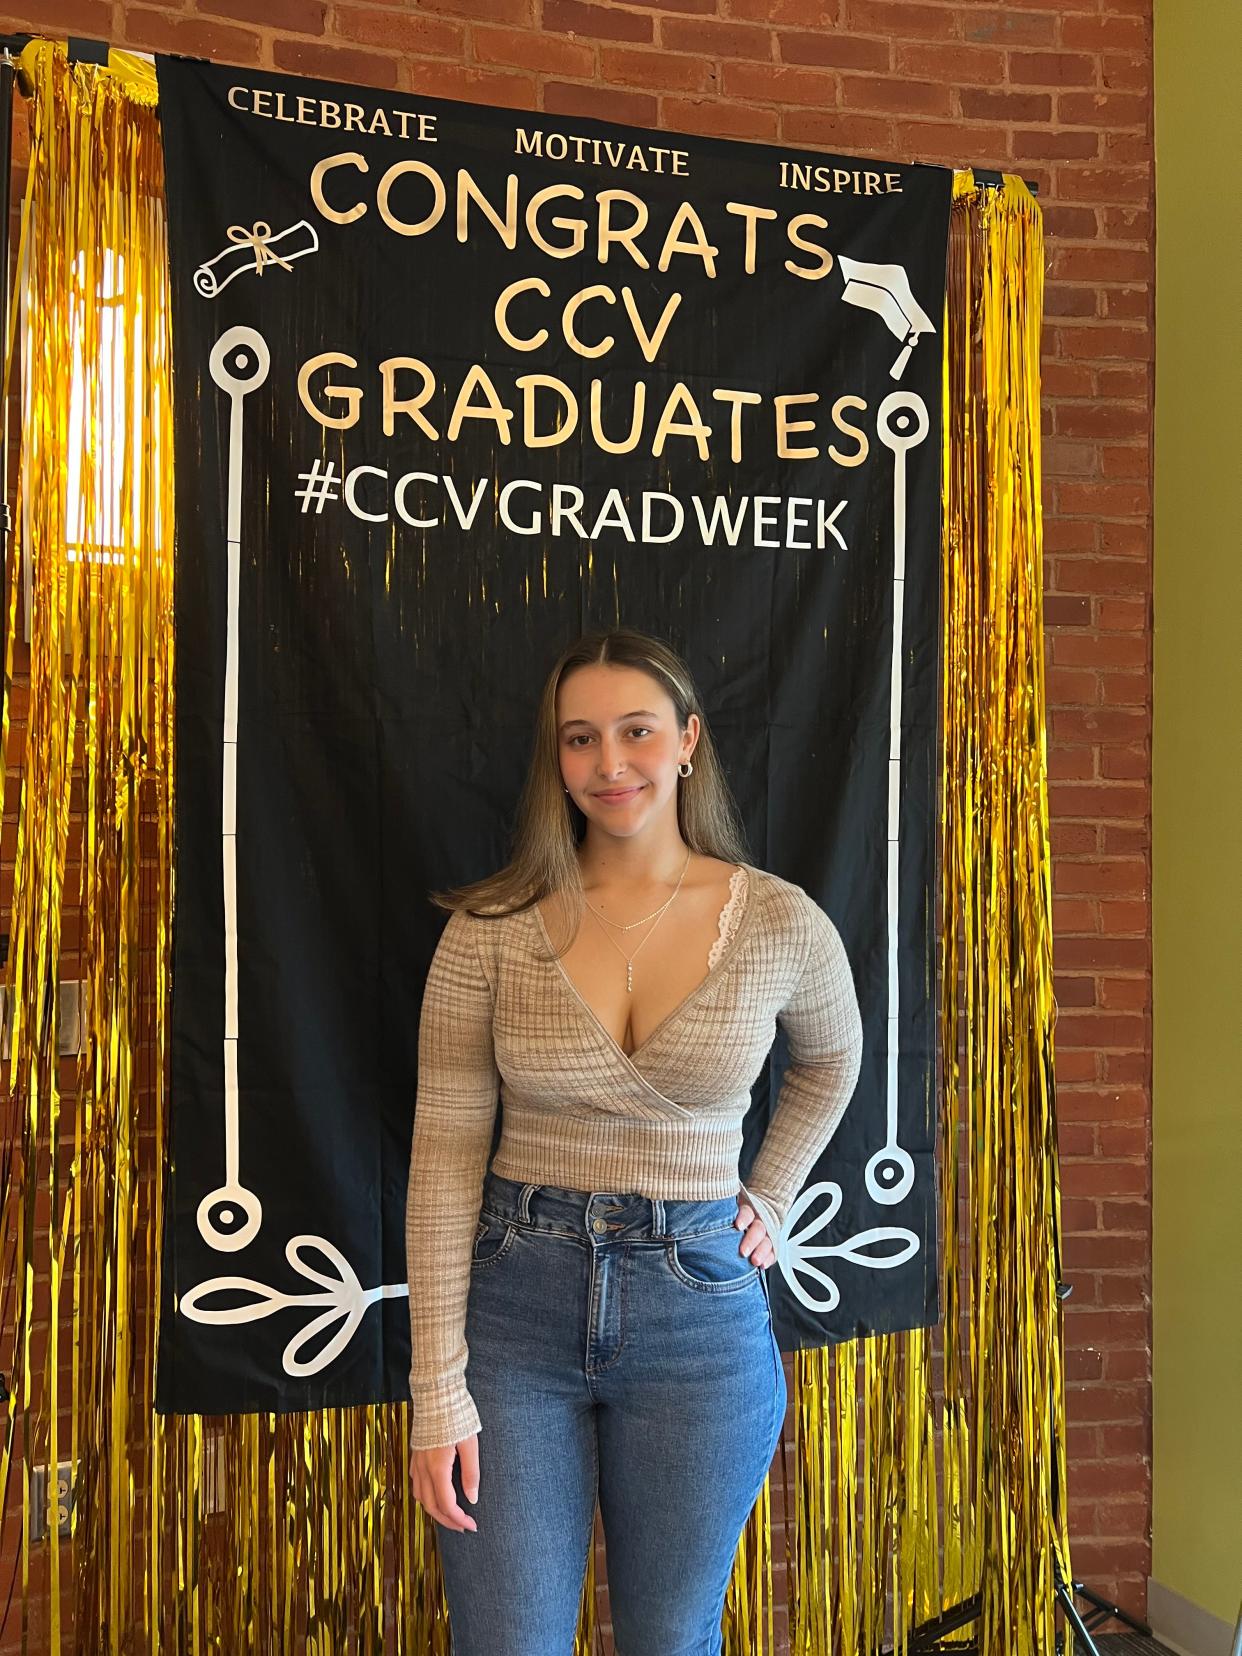 Faith Holbrook, 19, was weeks away from graduating with her associate's degree from Community College of Vermont on April 19, 2023. It was a special moment knowing how hard she worked through high school, taking Early College as a senior and then being among the first cohort of students to complete the McClure Free Degree Promise and earn an associate degree for free.